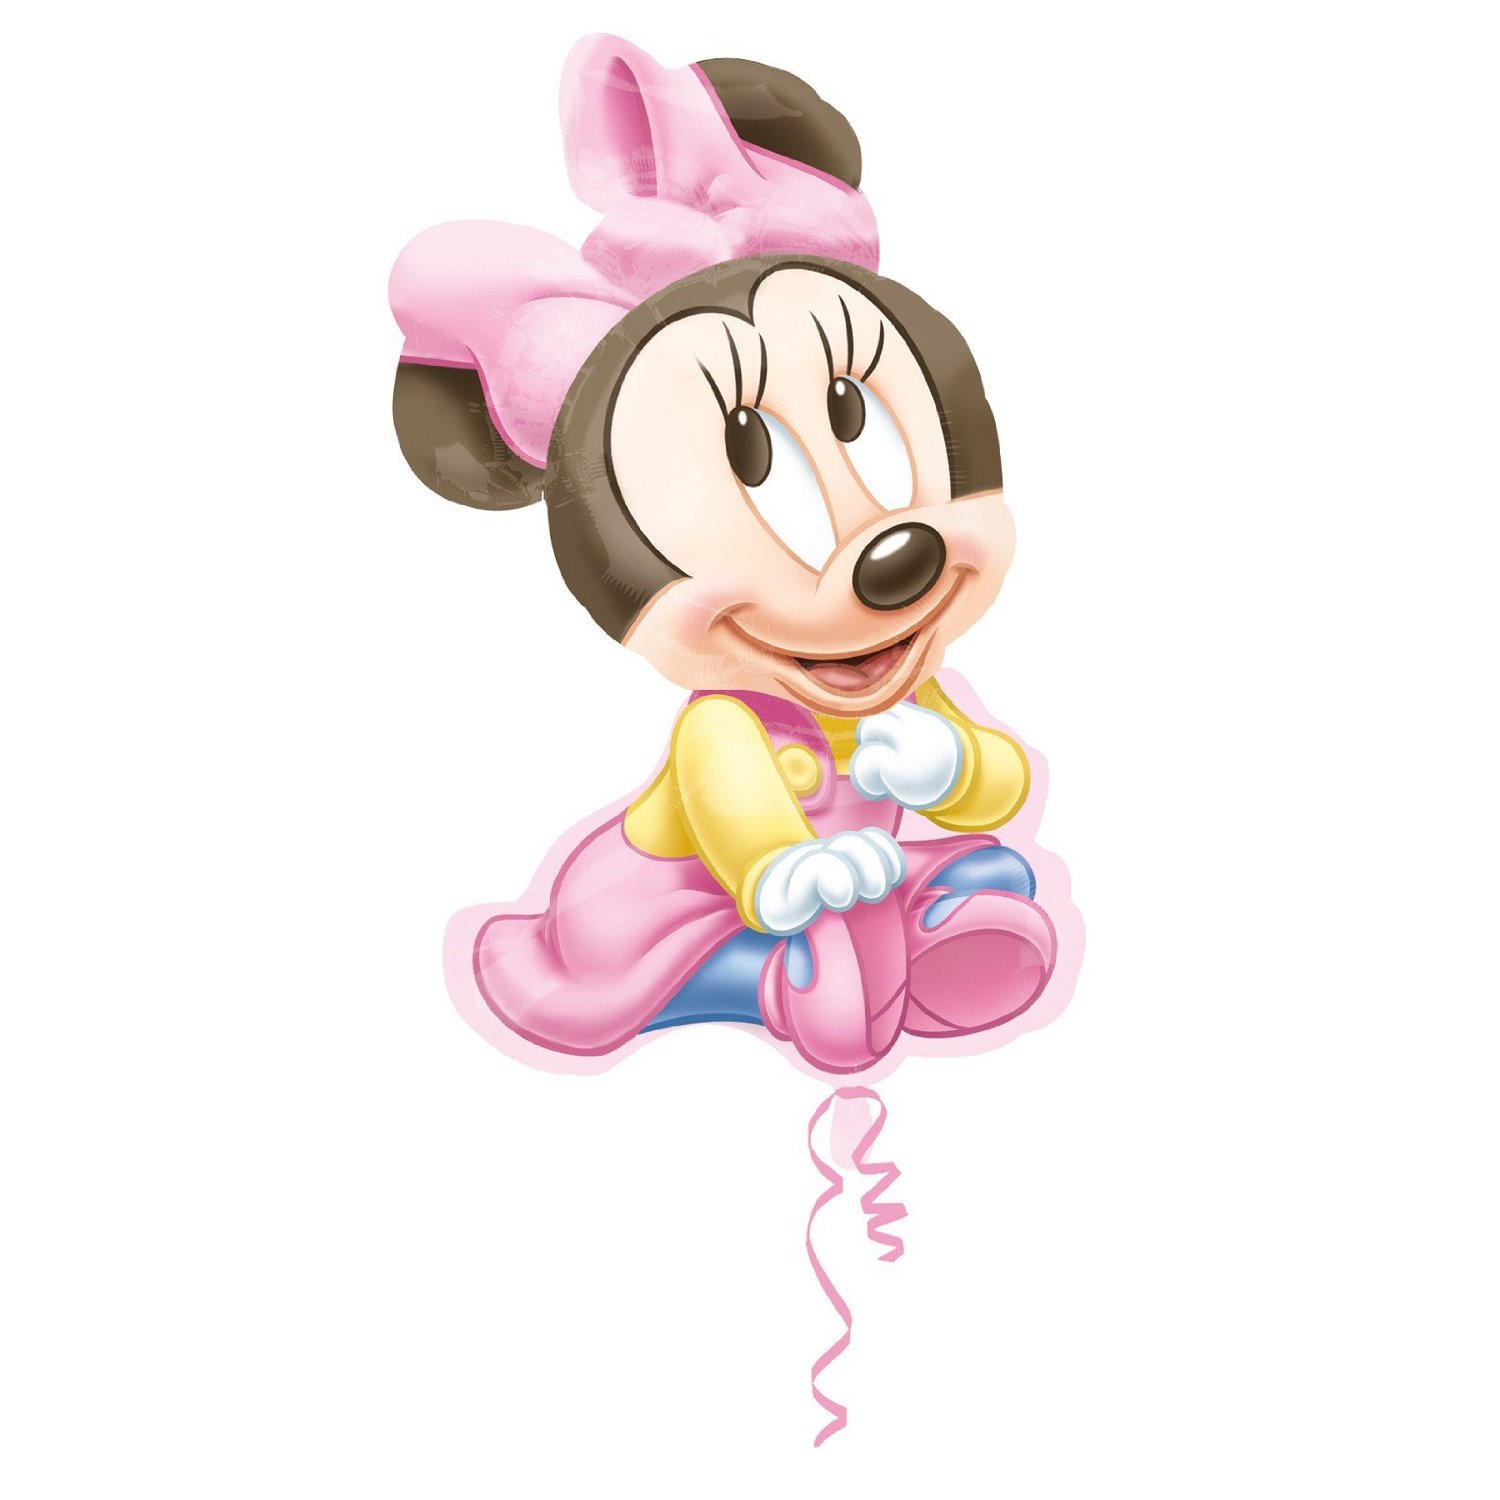 XL 33" Baby Minnie Mouse Disney Super Shape Mylar Foil Balloon Party Decoration - image 1 of 5